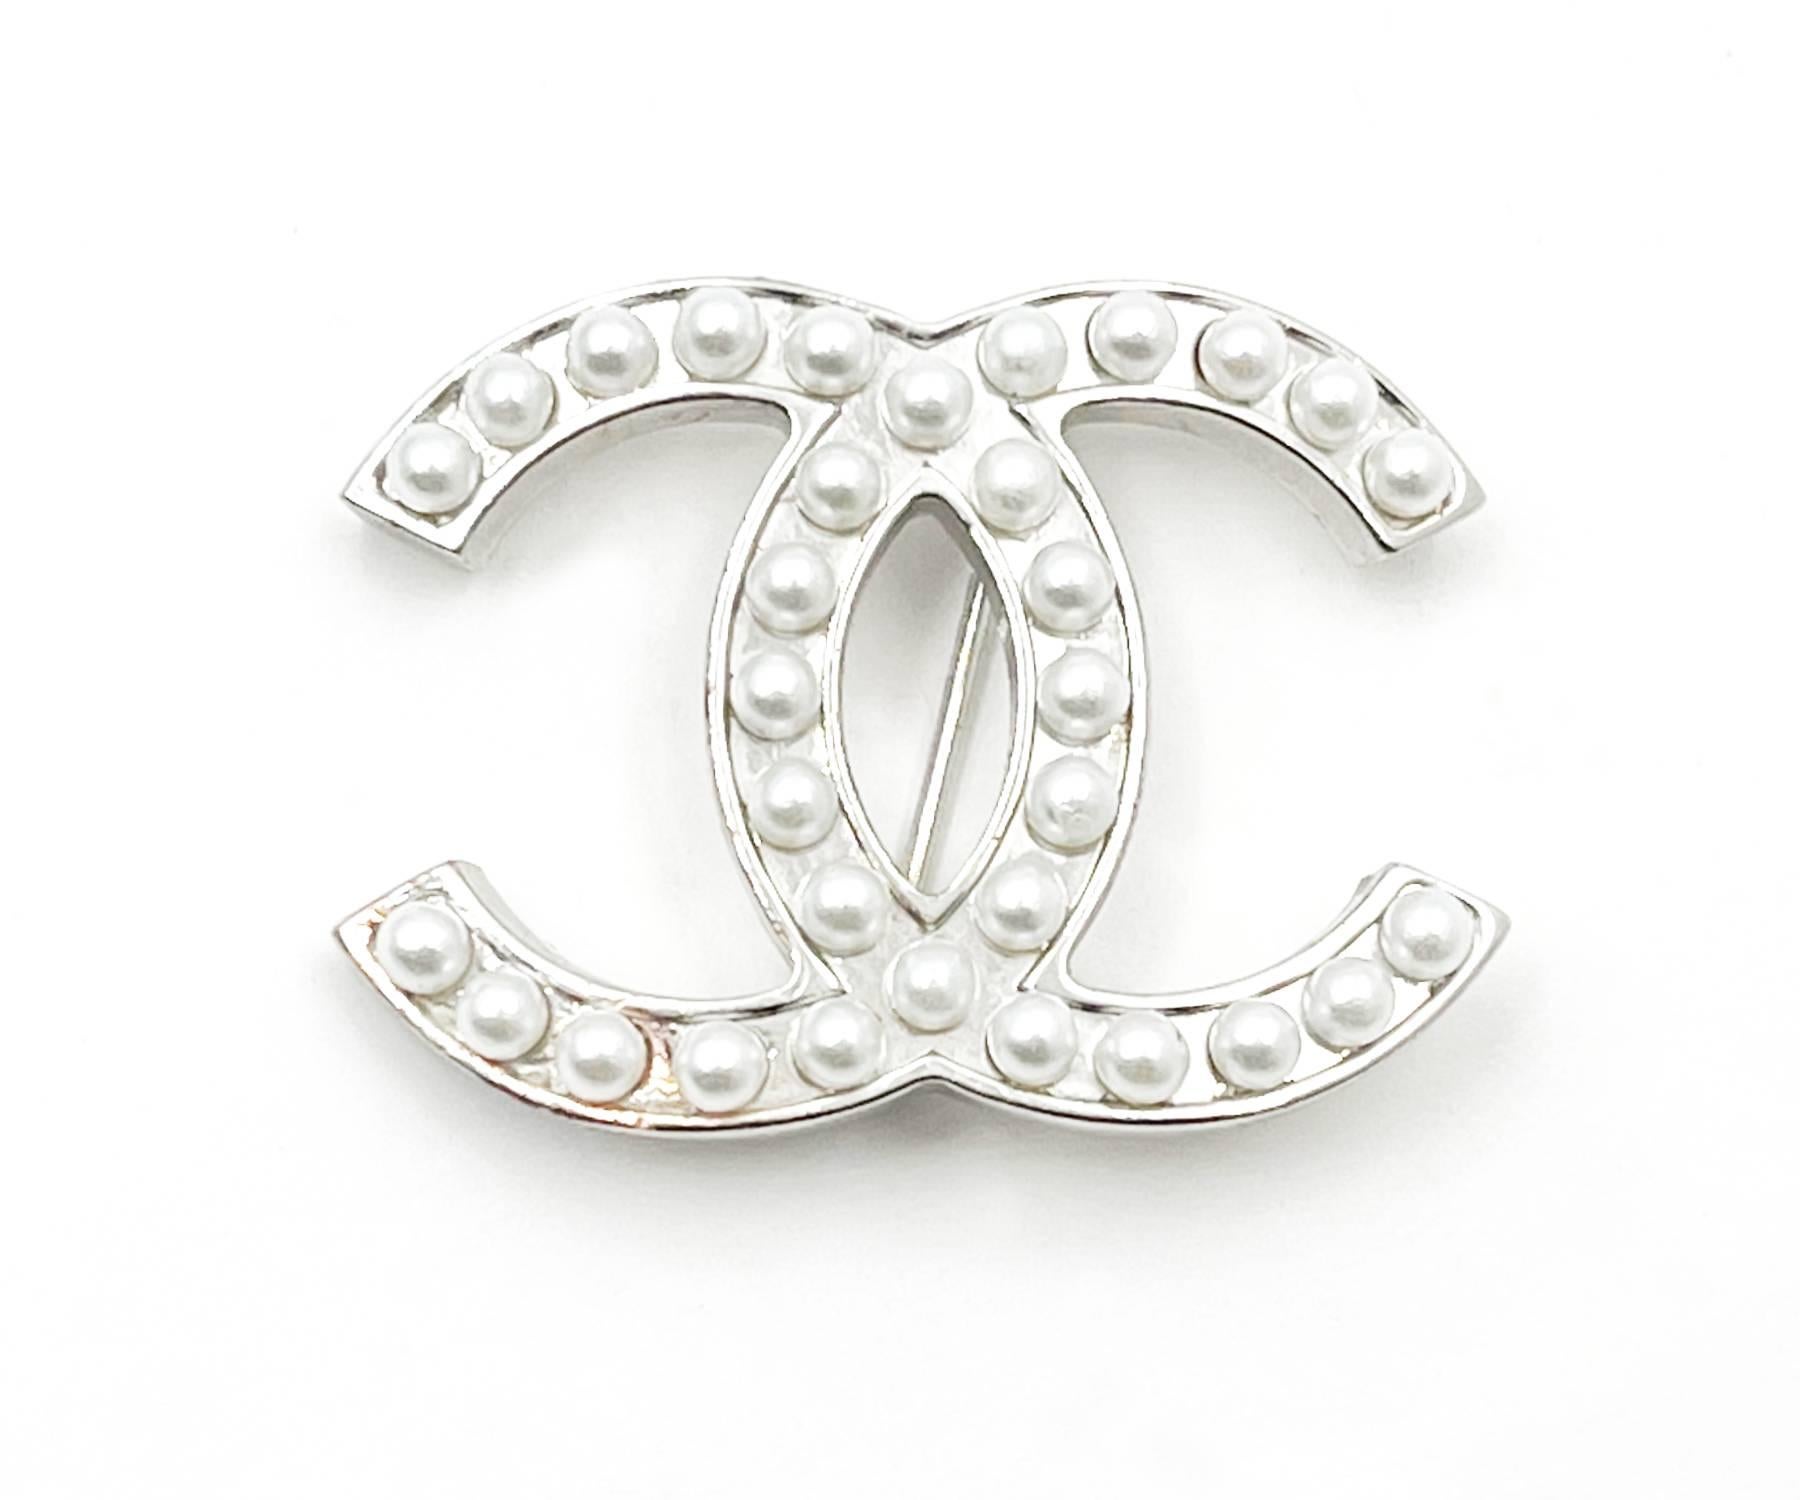 Chanel Classic Silver CC Pearl Brooch

*Marked 05
*Made in France
*Comes with the original box

-Approximately 1.6″ x 1″
-Very pretty and classic
-In a very good condition

2075-43572
